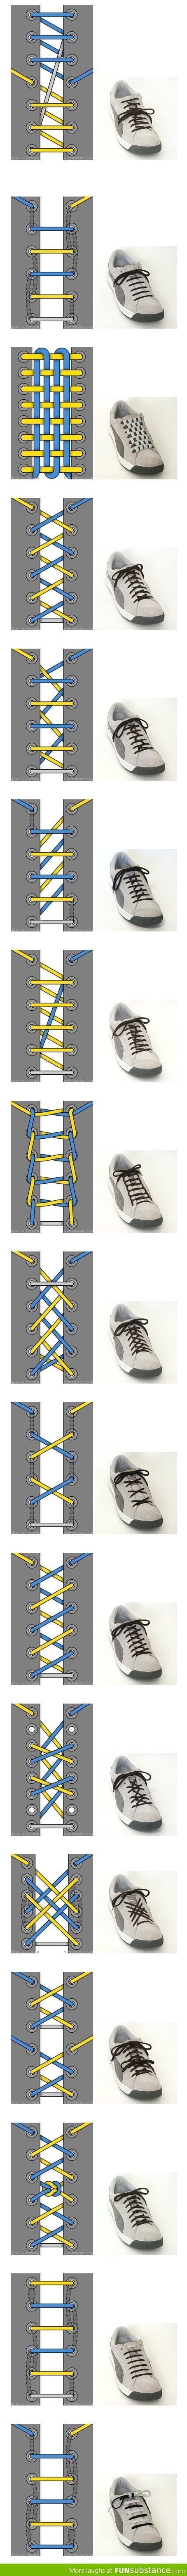 Different ways to tie your shoes